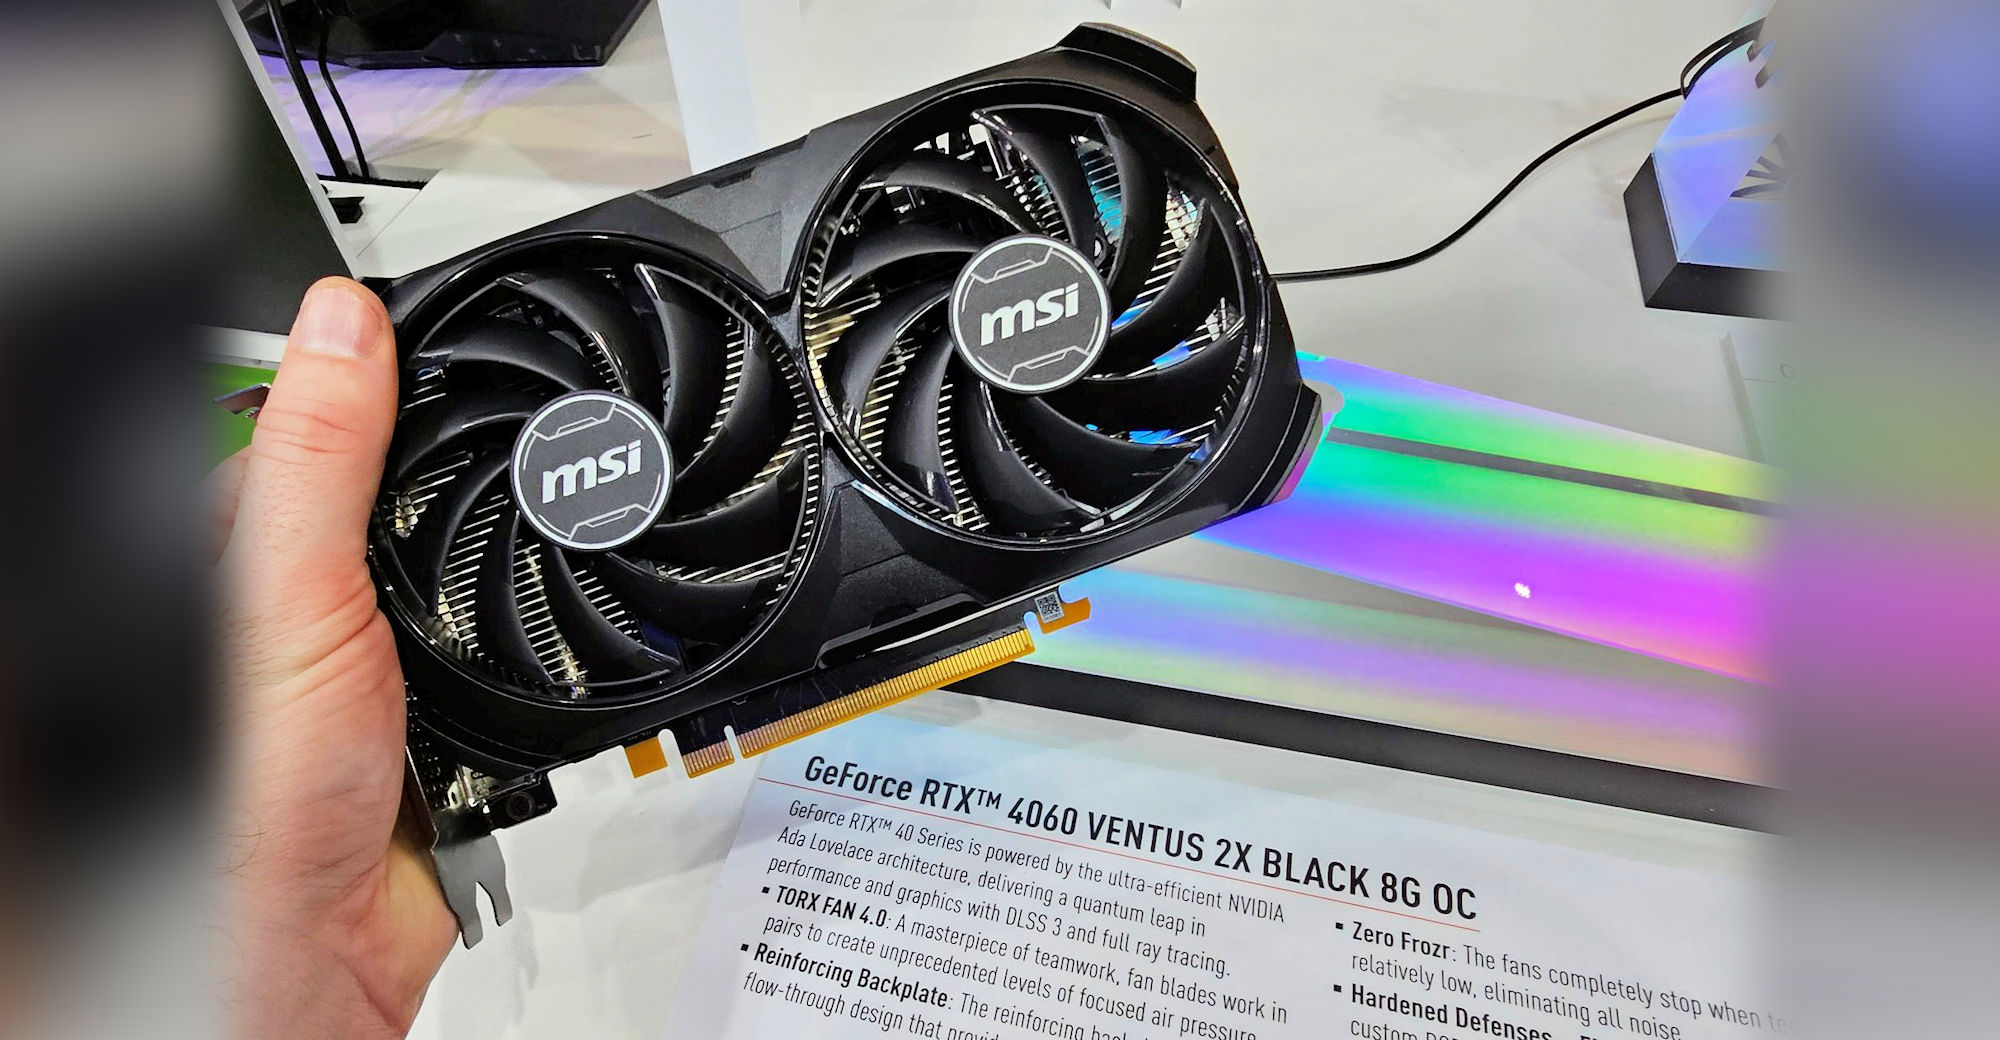 NVIDIA GeForce RTX 4060 Ti 16 GB Review - Twice the VRAM Making a  Difference? - Average FPS